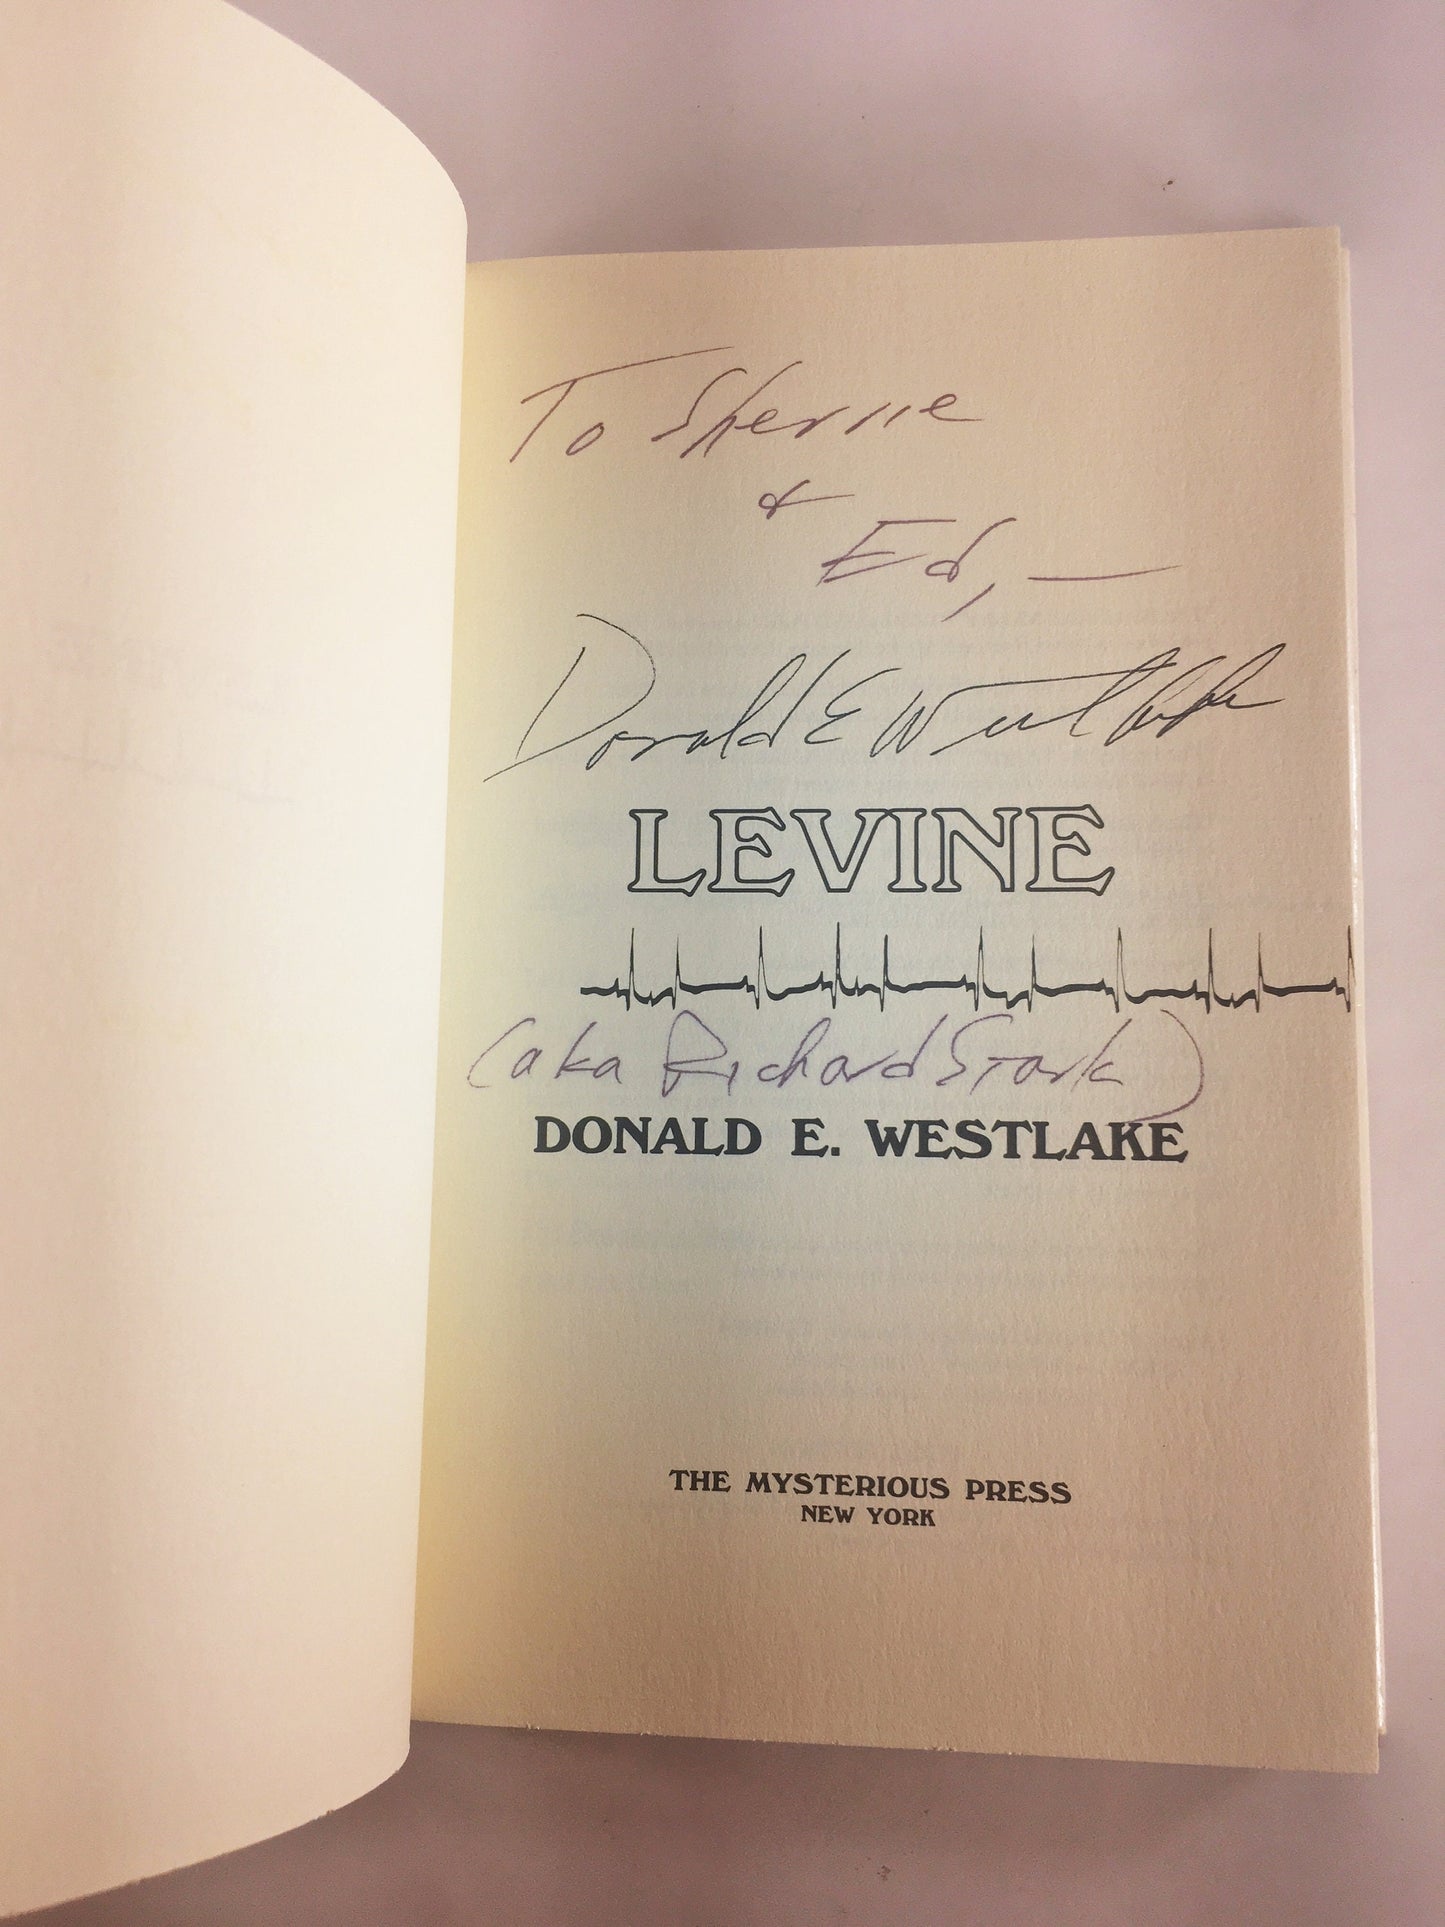 SIGNED Donald Westlake AS Richard Stark! First Edition vintage book Levine circa 1984. Author of Slayground, Mercenaries. Father's Day gift